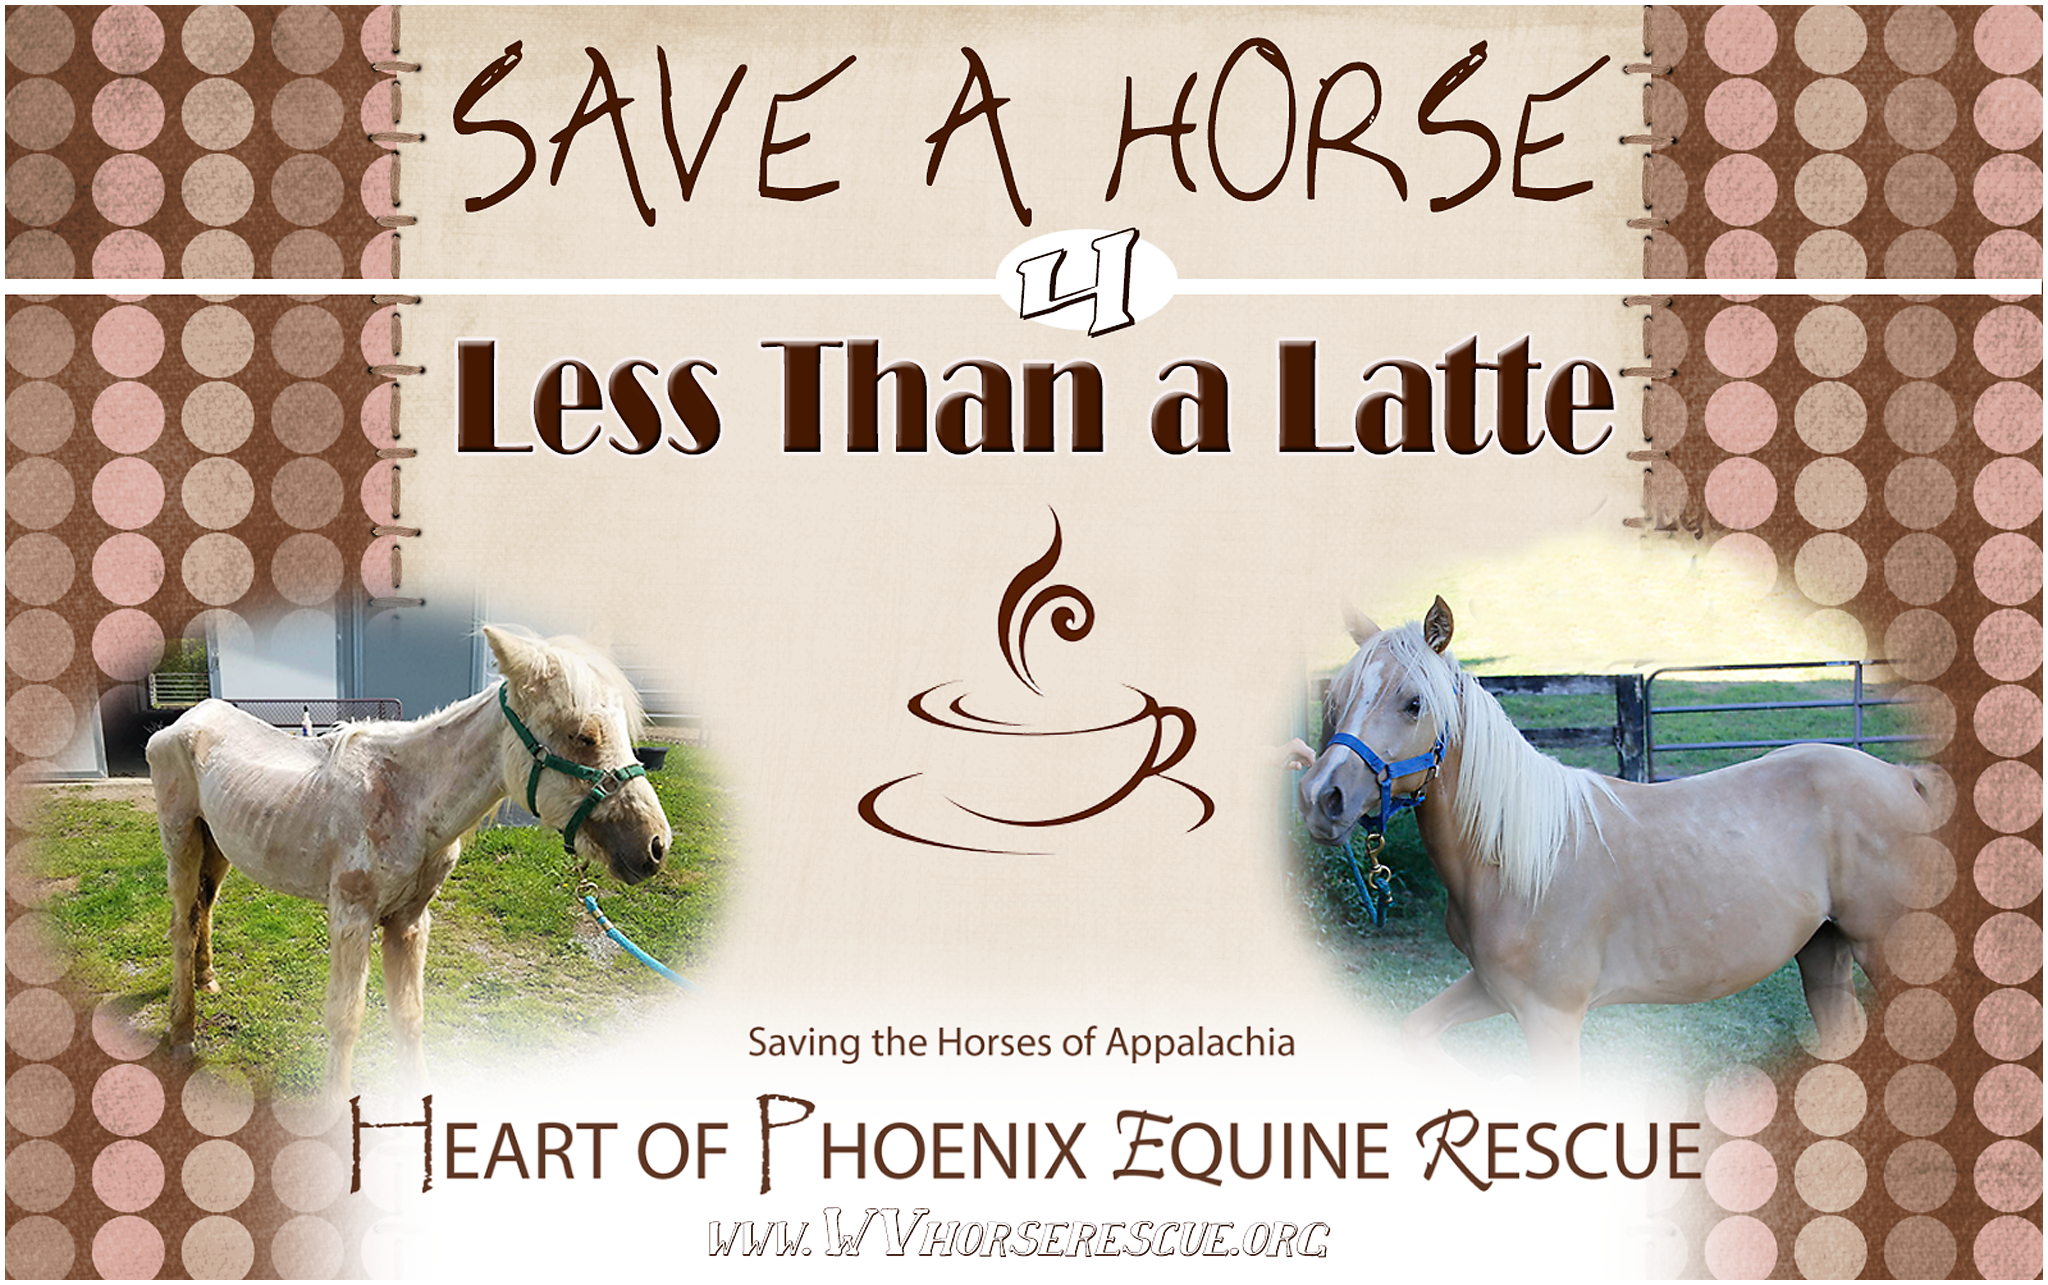 Save a Horse for Less than a Latte!